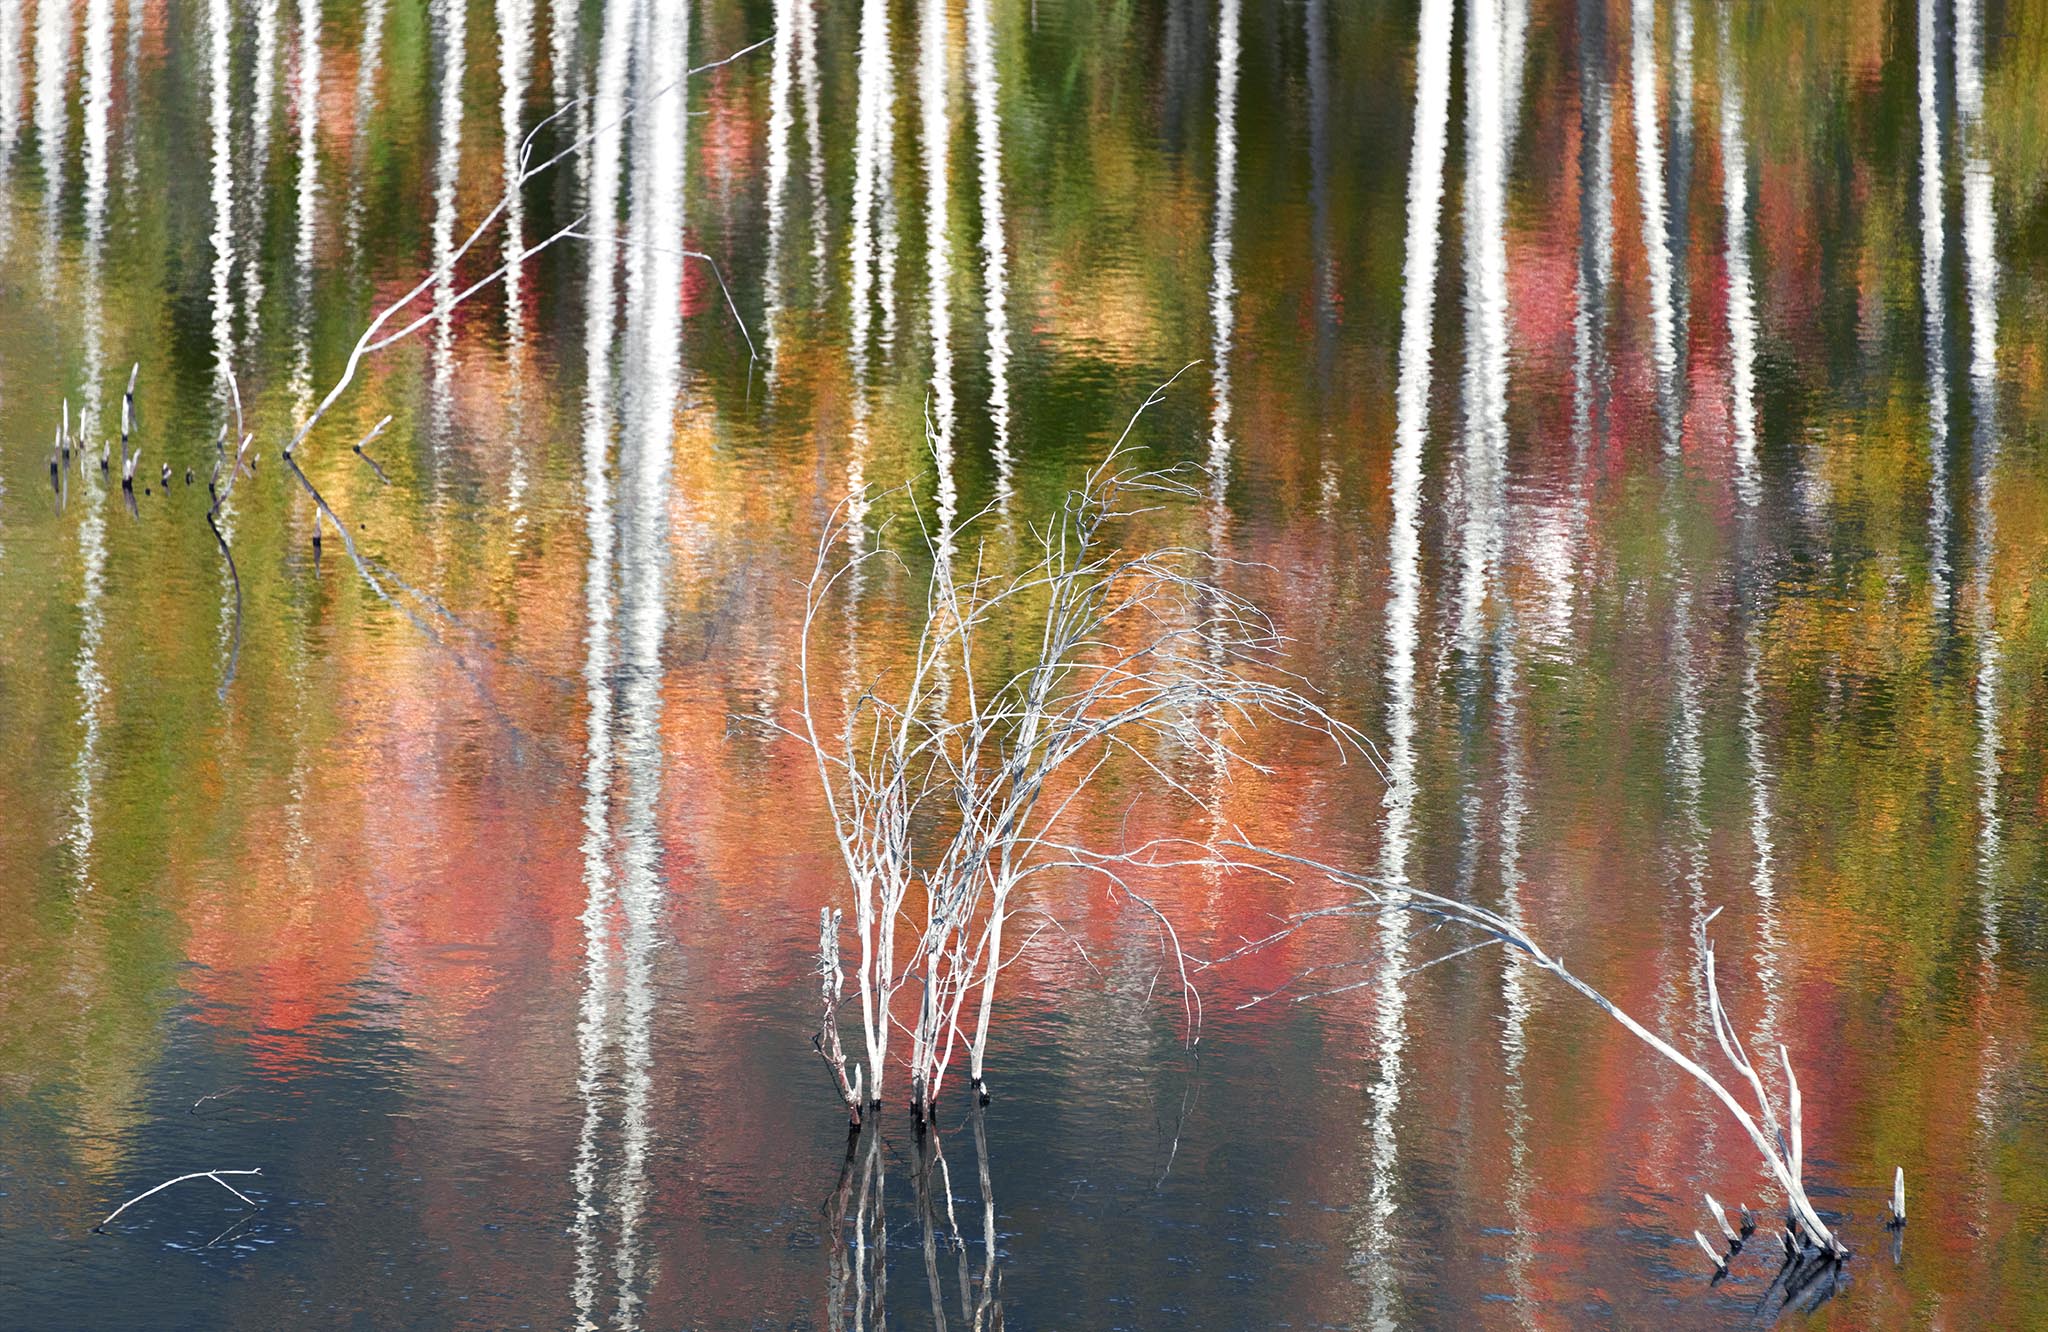 Colorful aspens in reflection